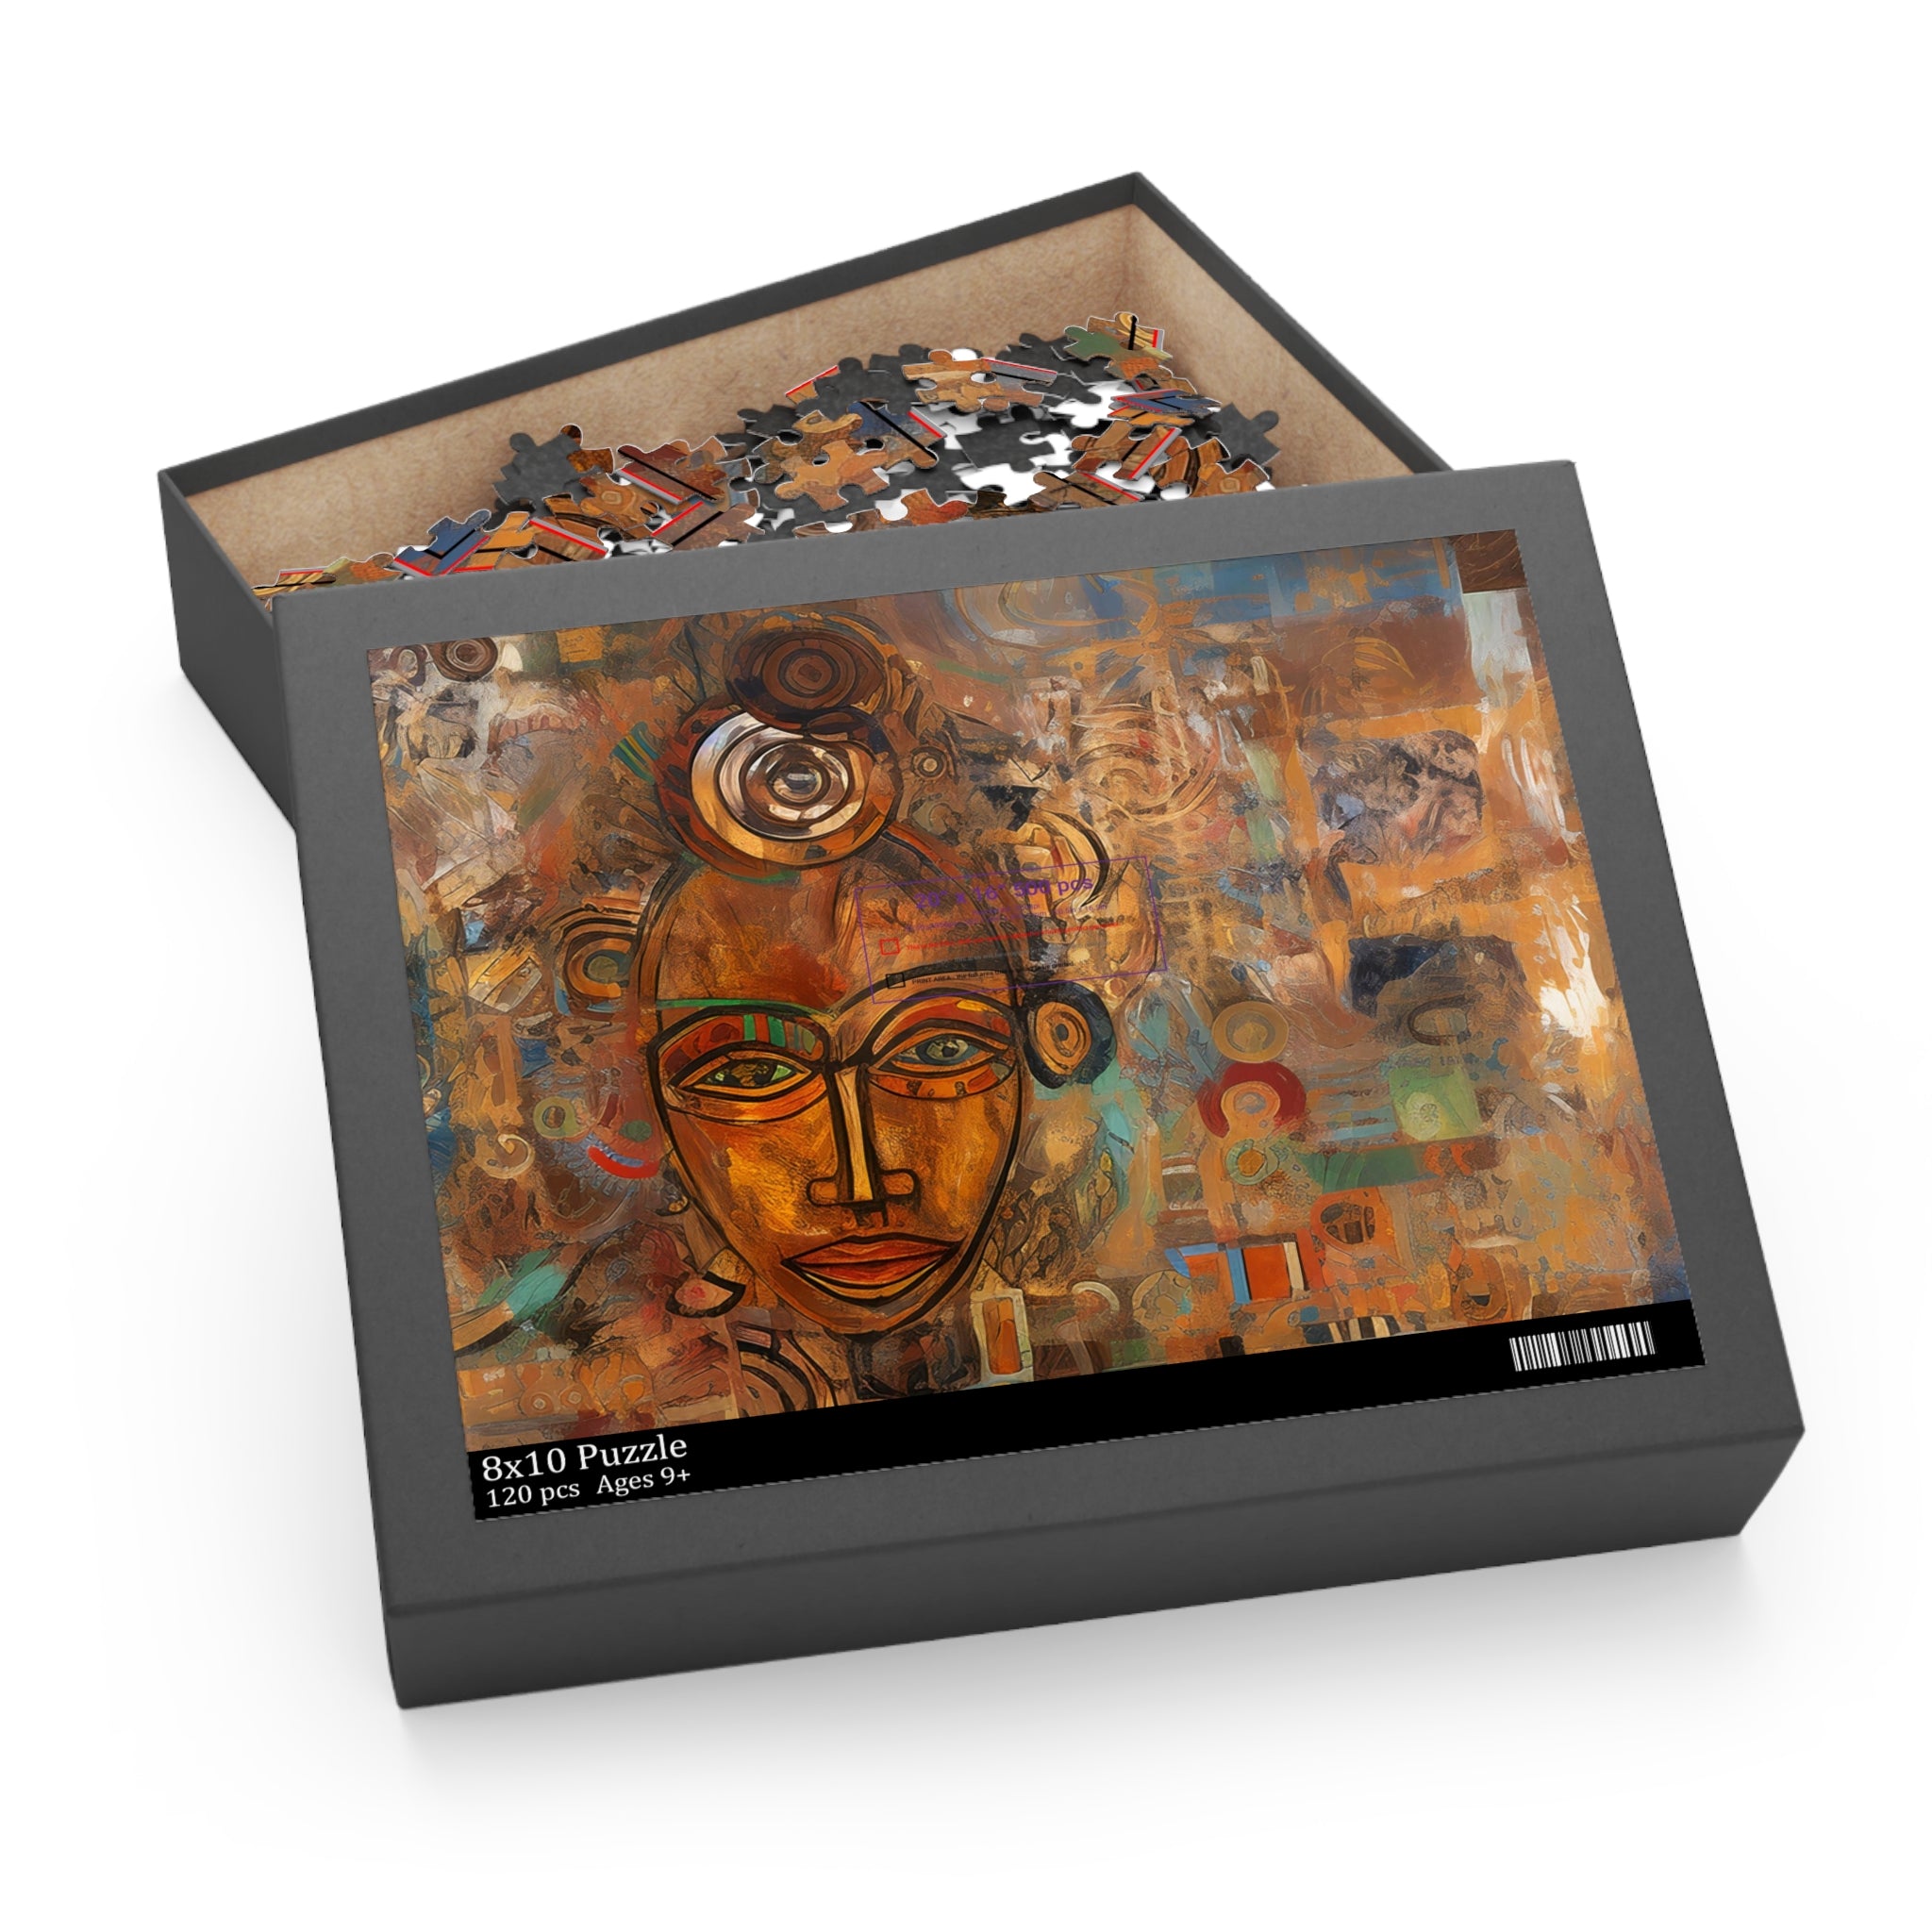 Box cover view of 8x10 African Abstract Art Puzzle.